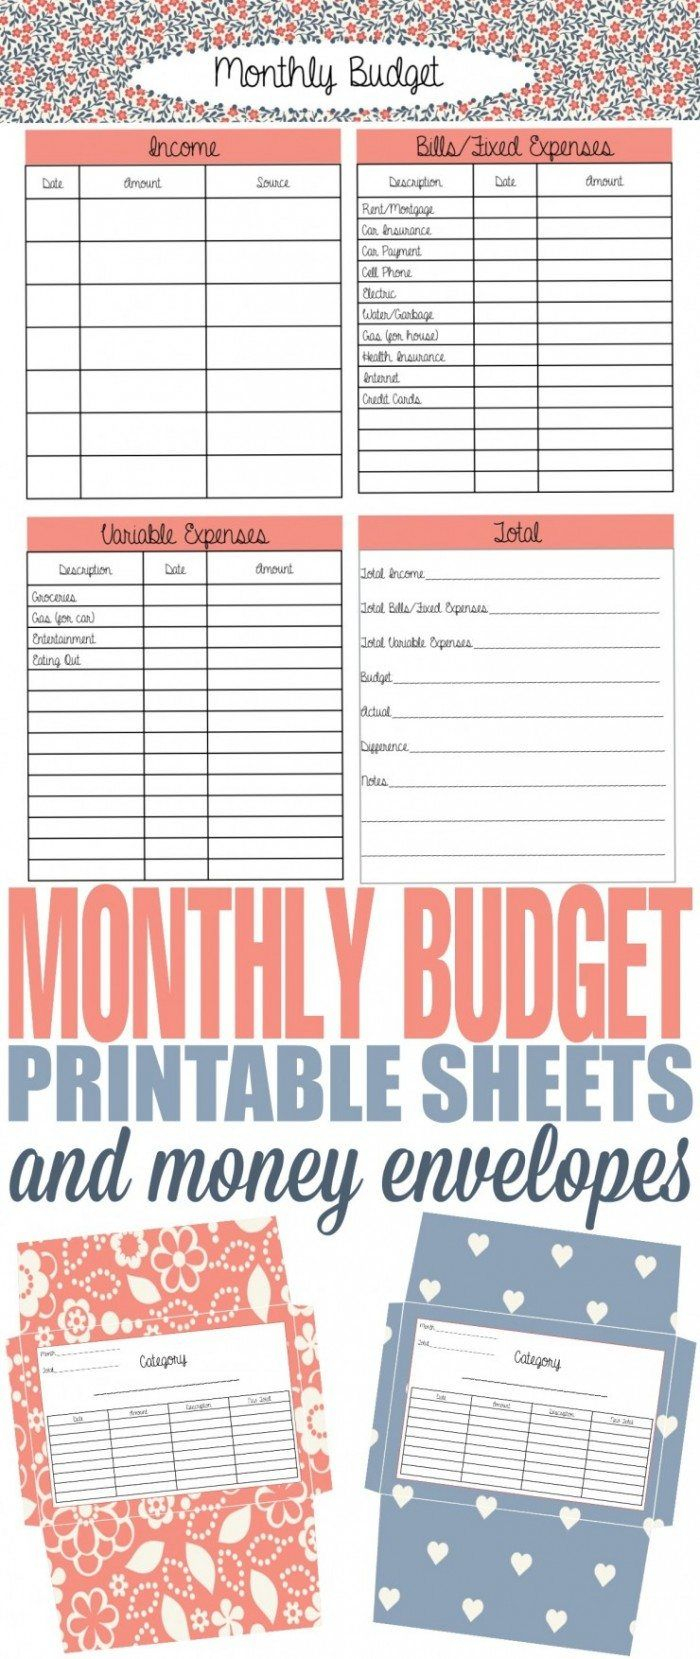 How To Budget And Spend Wisely With A Free Printable Envelope System - Free Printable Money Envelopes